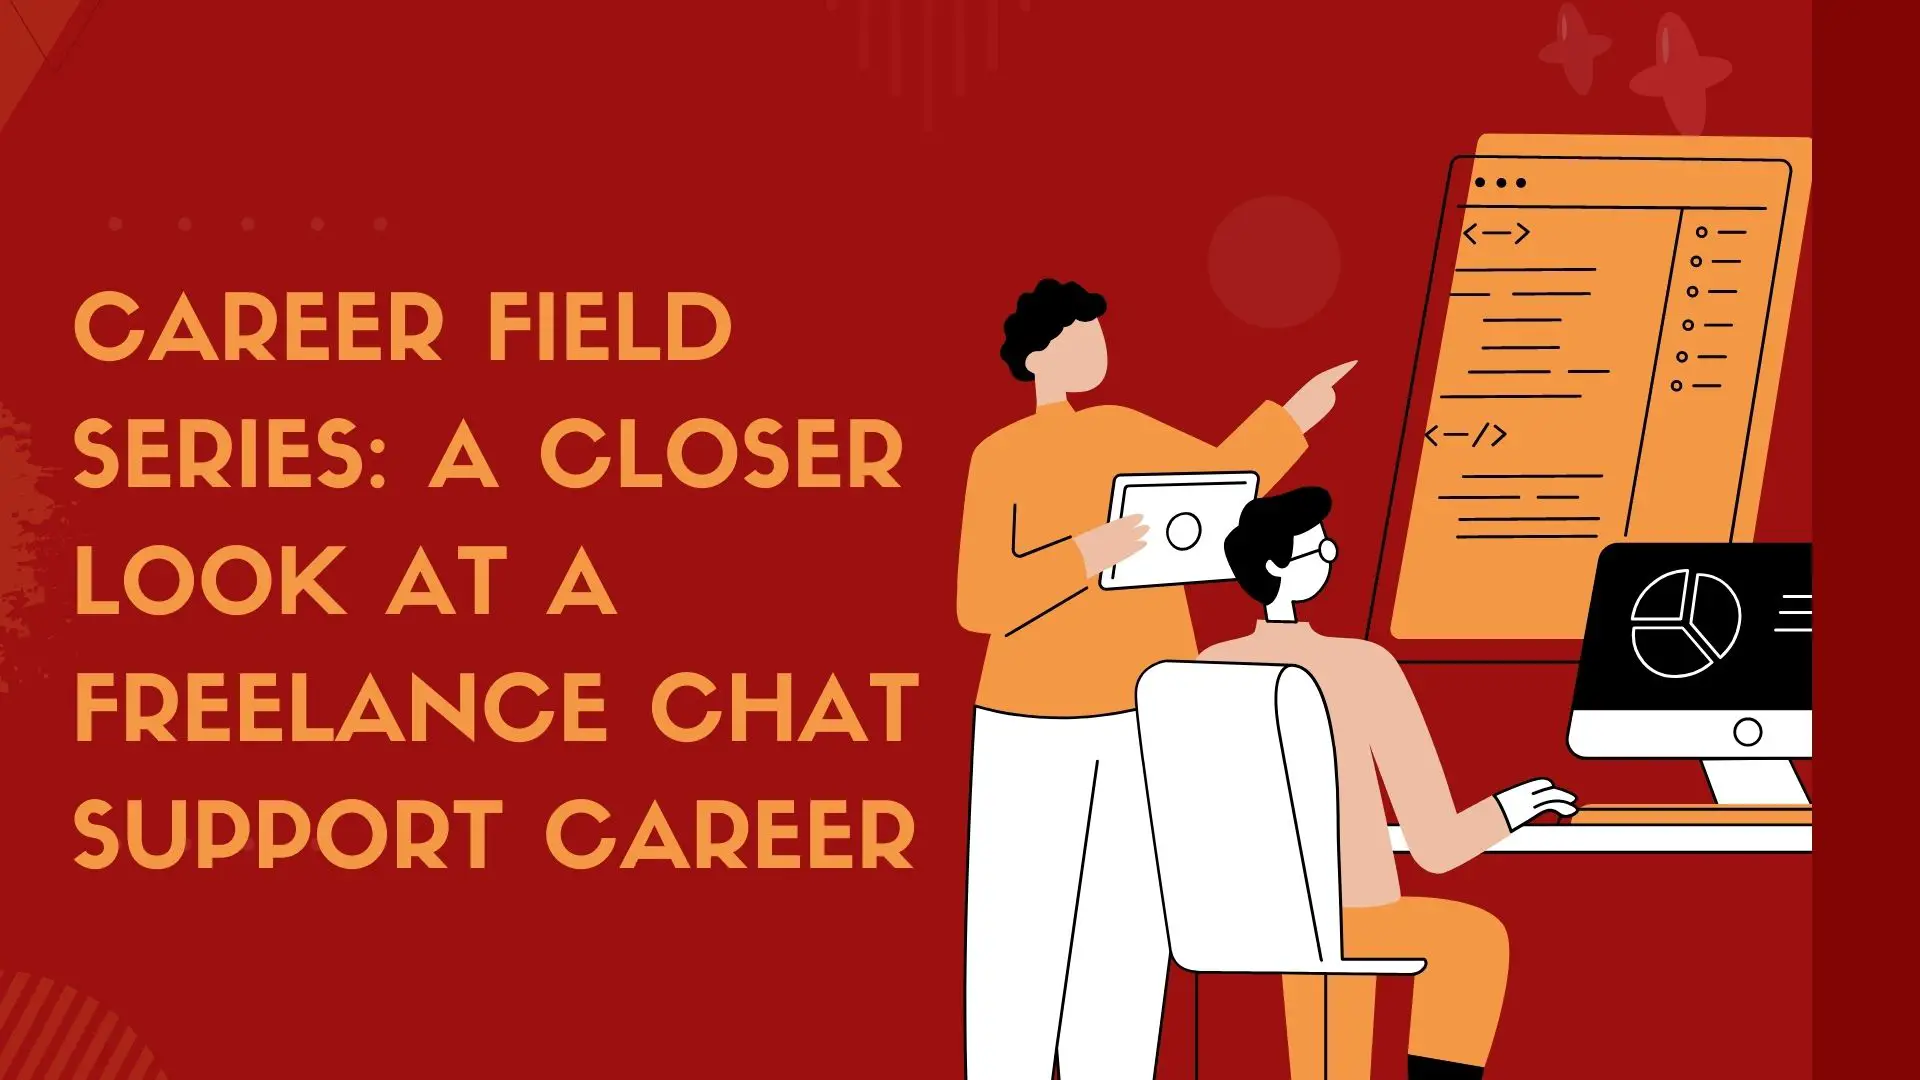 Career Field Series: A Closer Look At A Freelance Chat Support Career